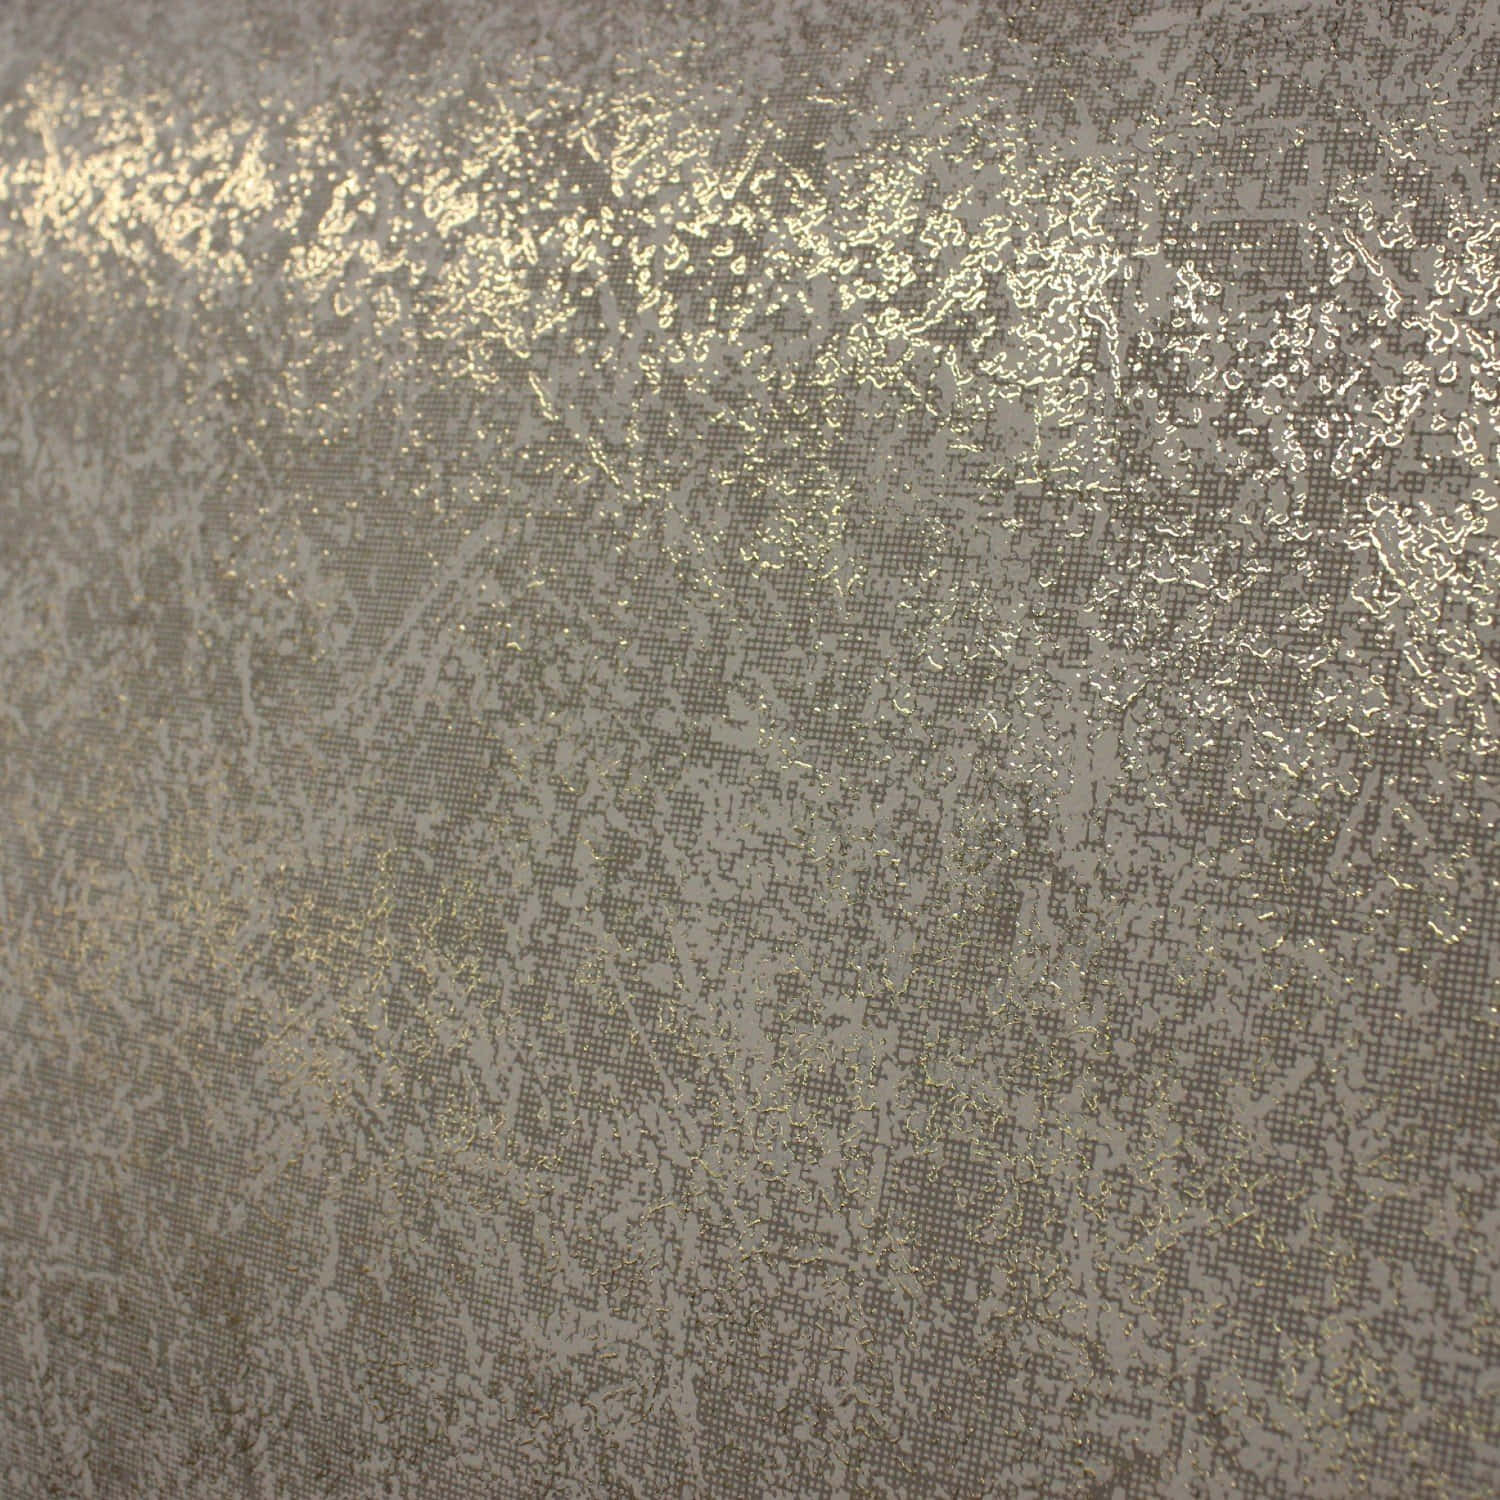 A Close Up Of A Wall With A Metallic Finish Wallpaper